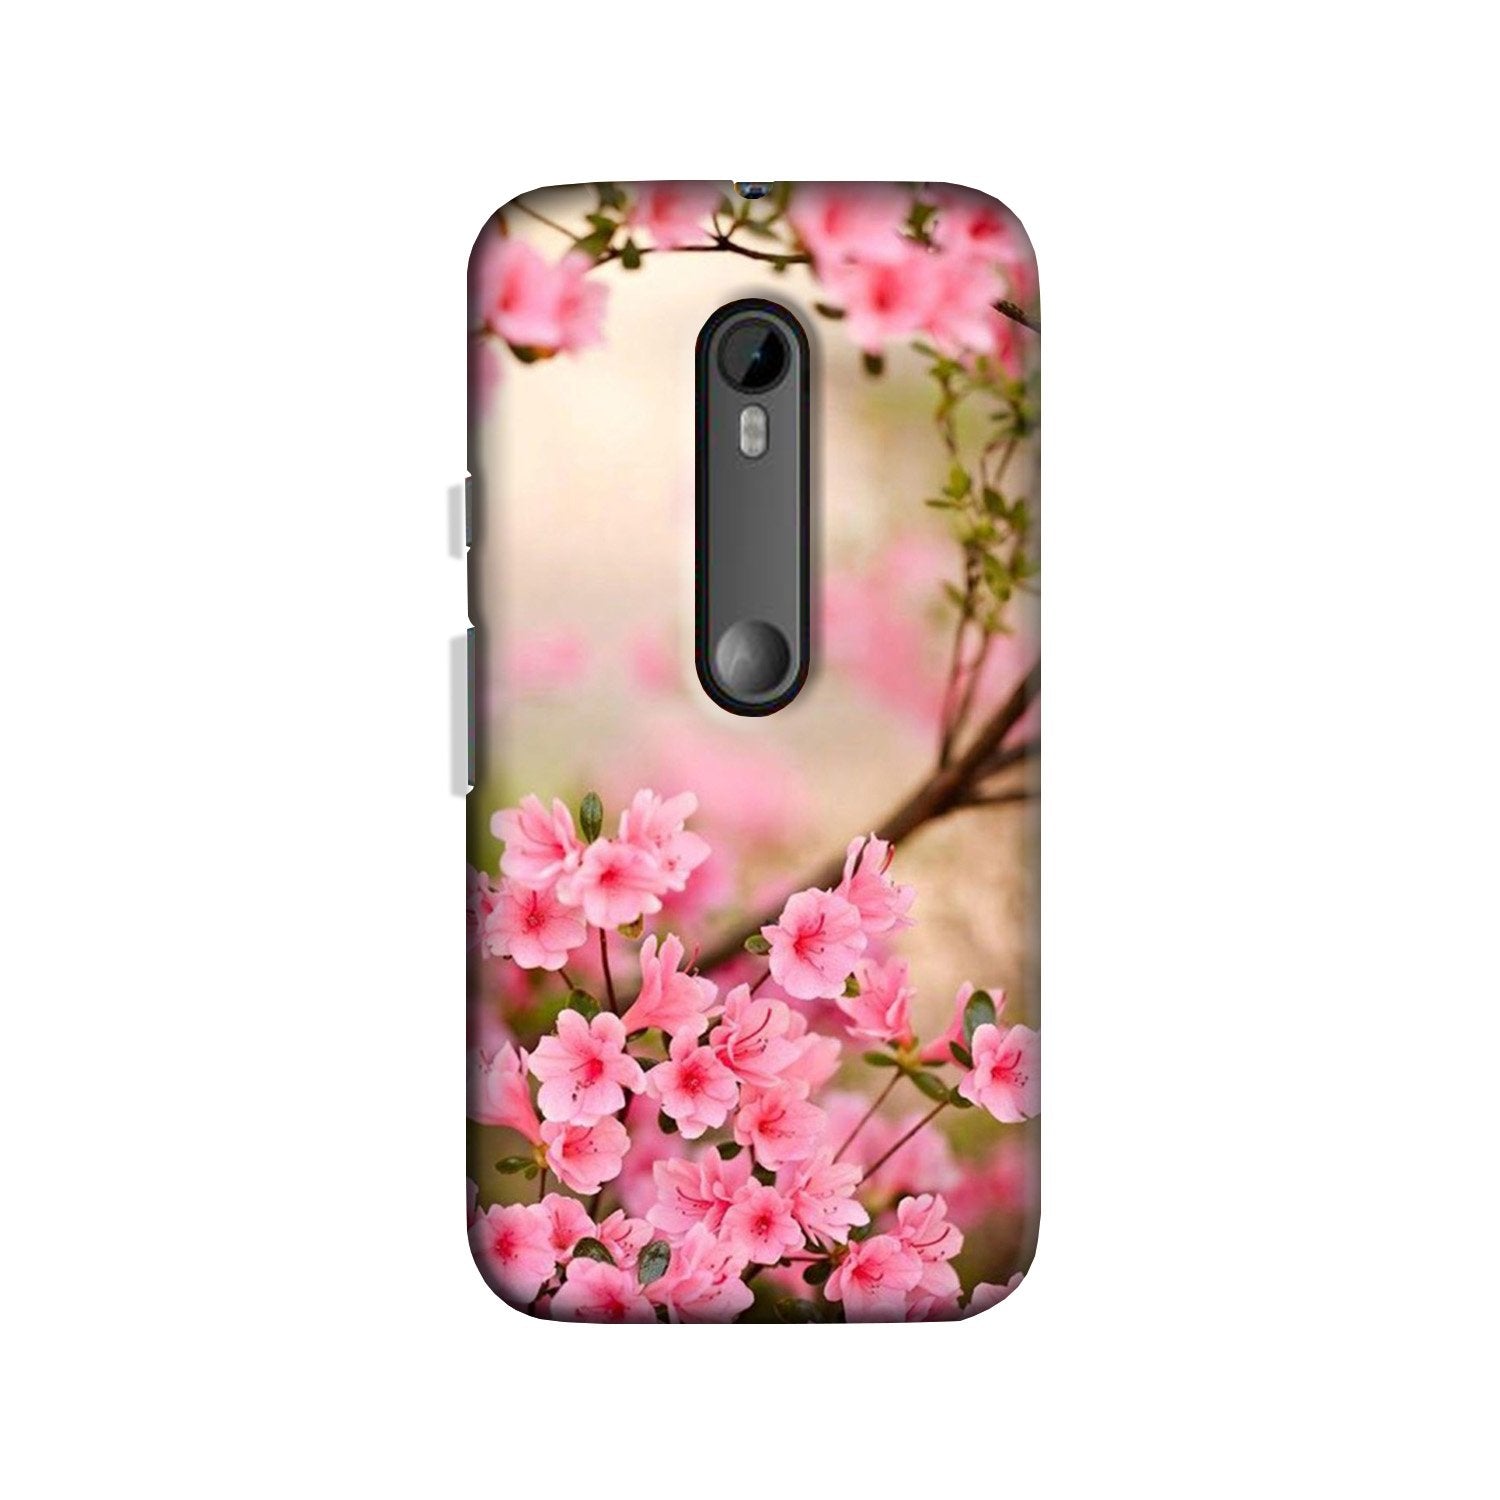 Pink flowers Case for Moto X Play